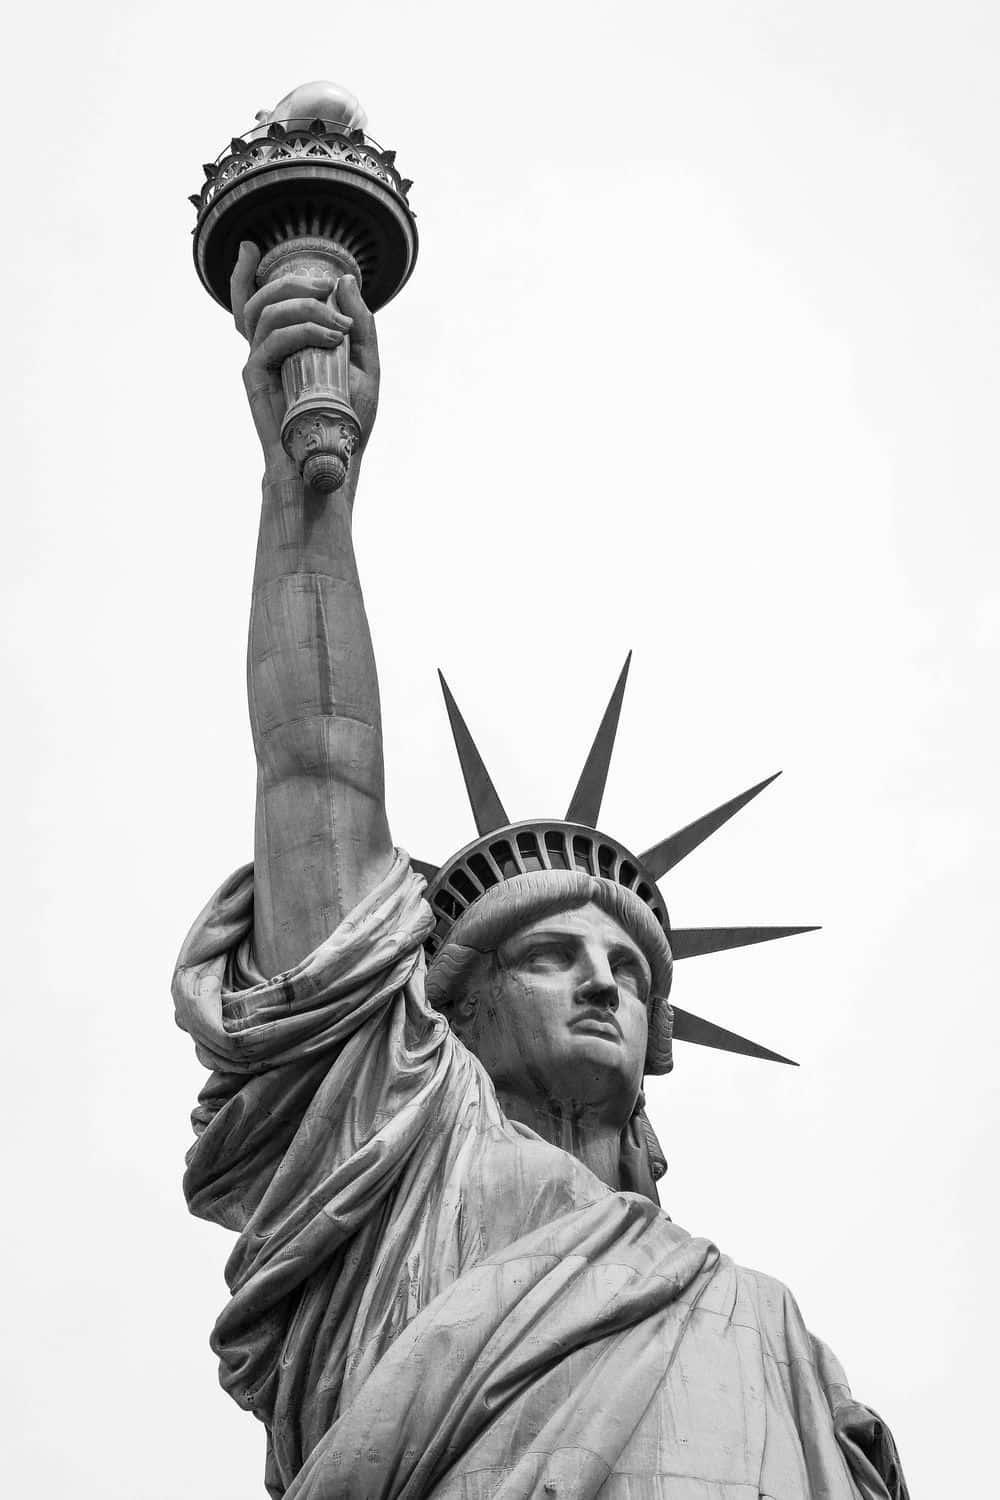 An iconic symbol of freedom, the Statue of Liberty stands in the harbor of New York City, United States.